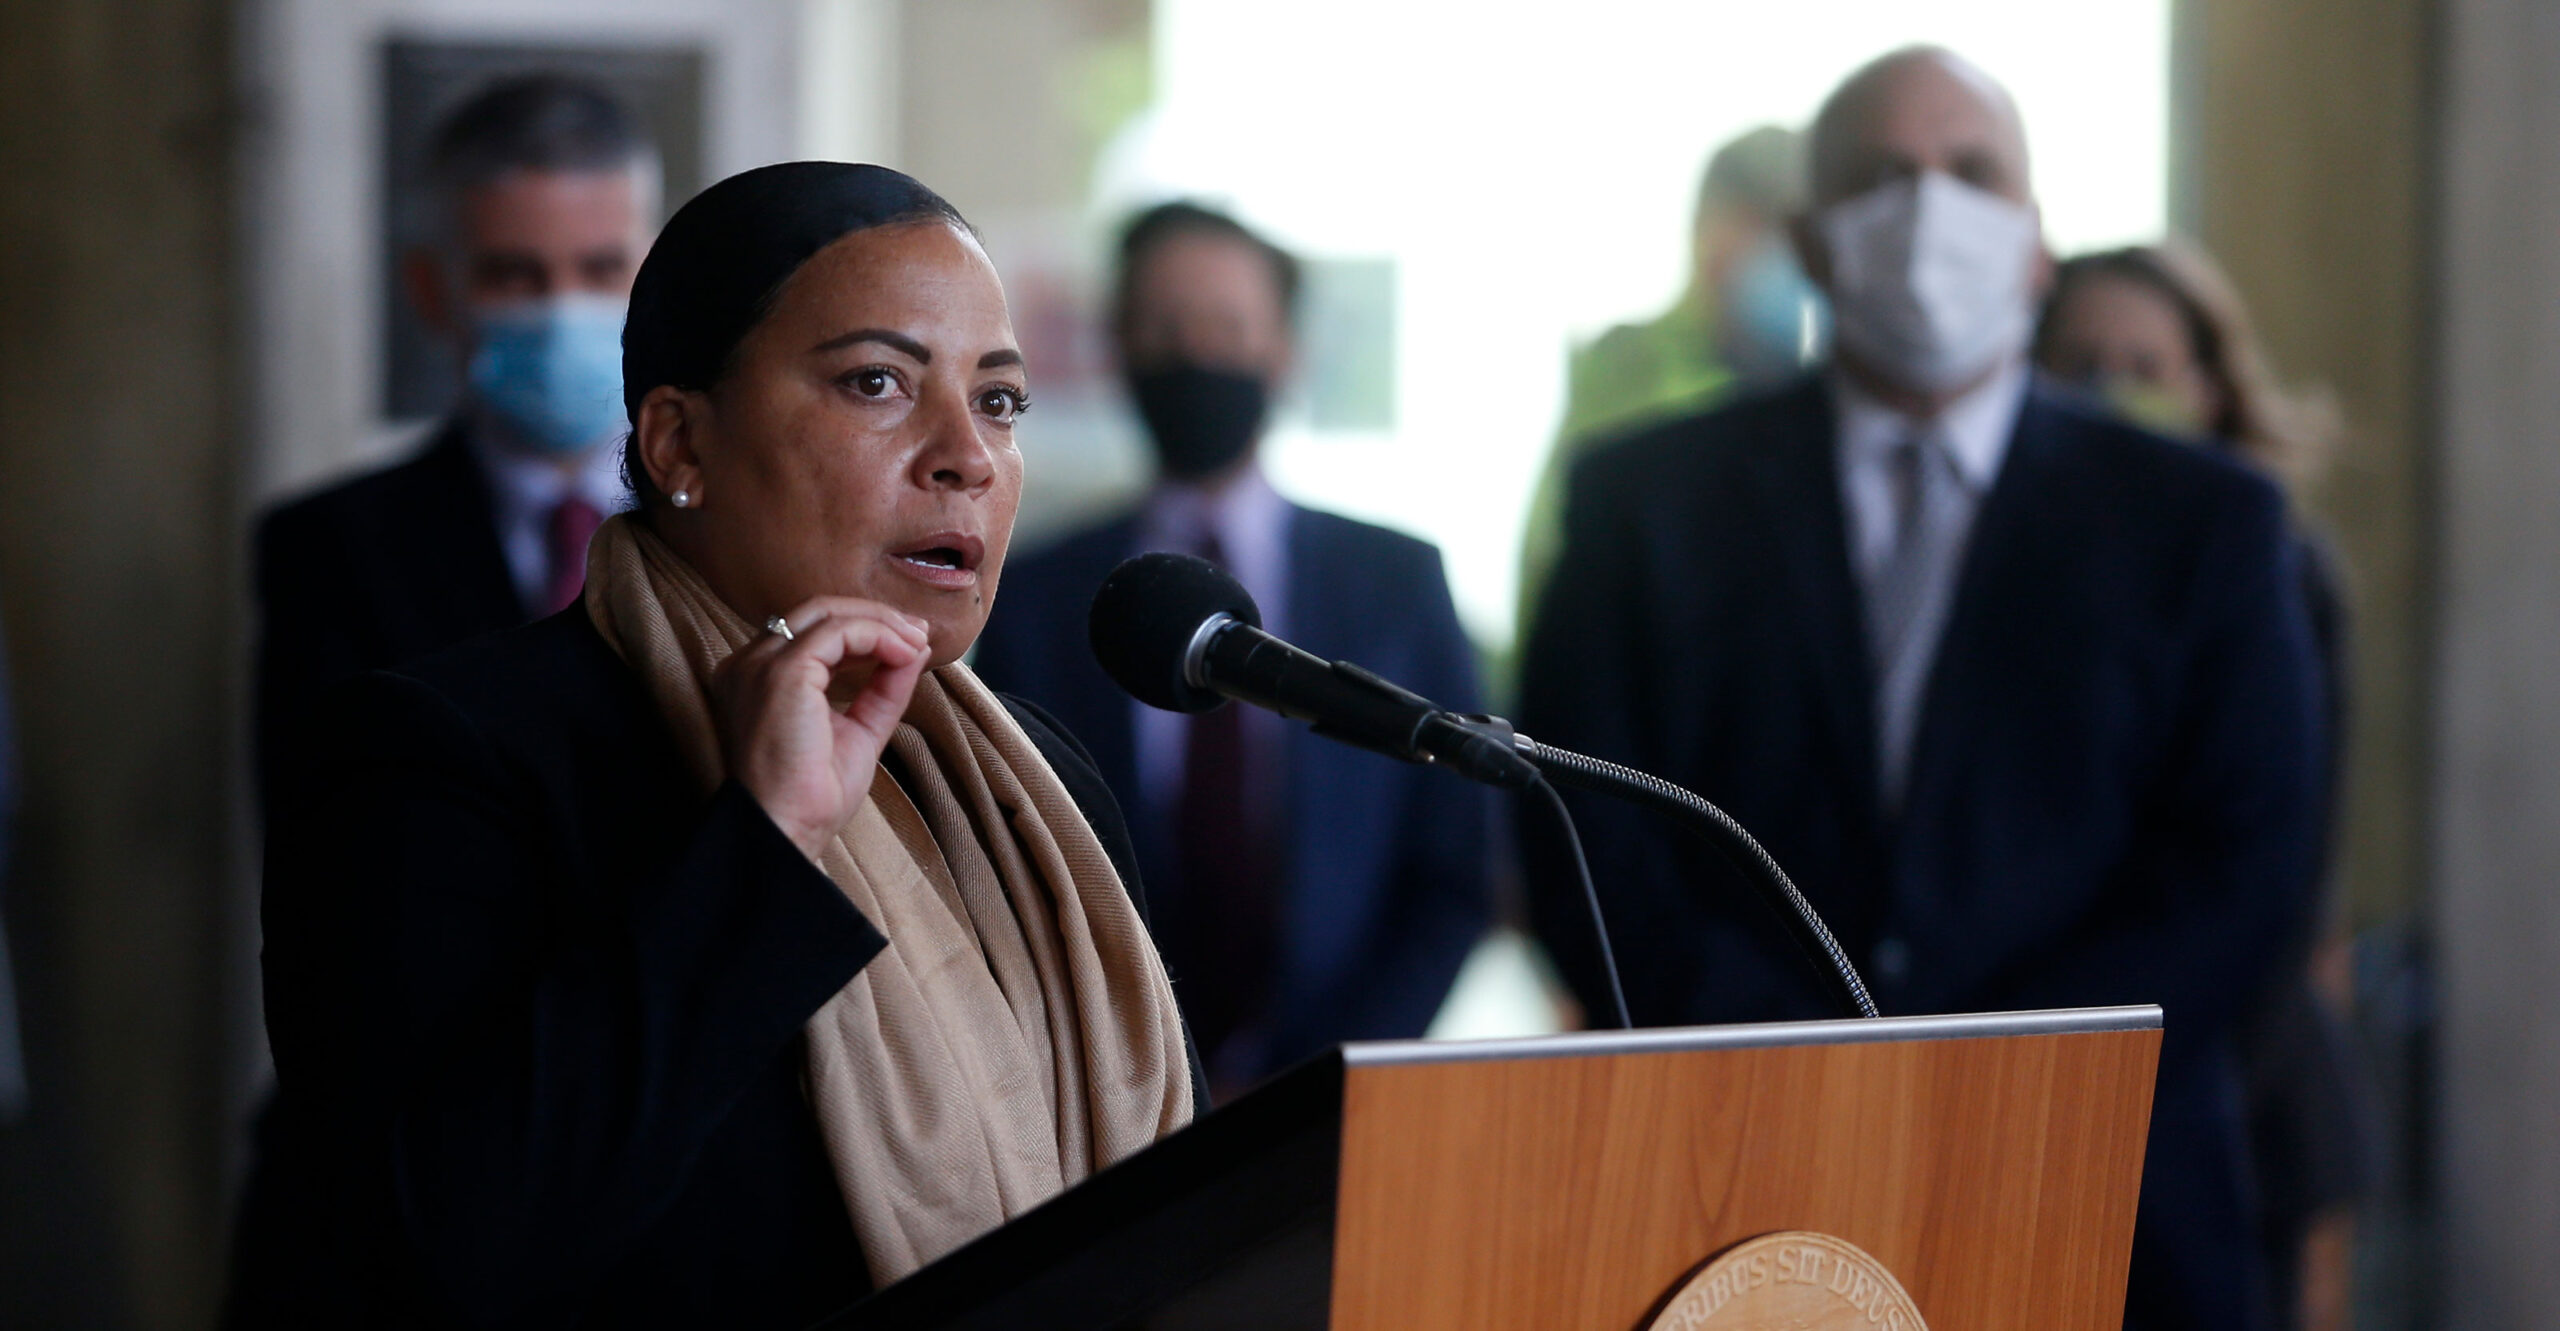 Meet Rachael Rollins, the Rogue Prosecutor Whose Policies Are Wreaking Havoc in Boston